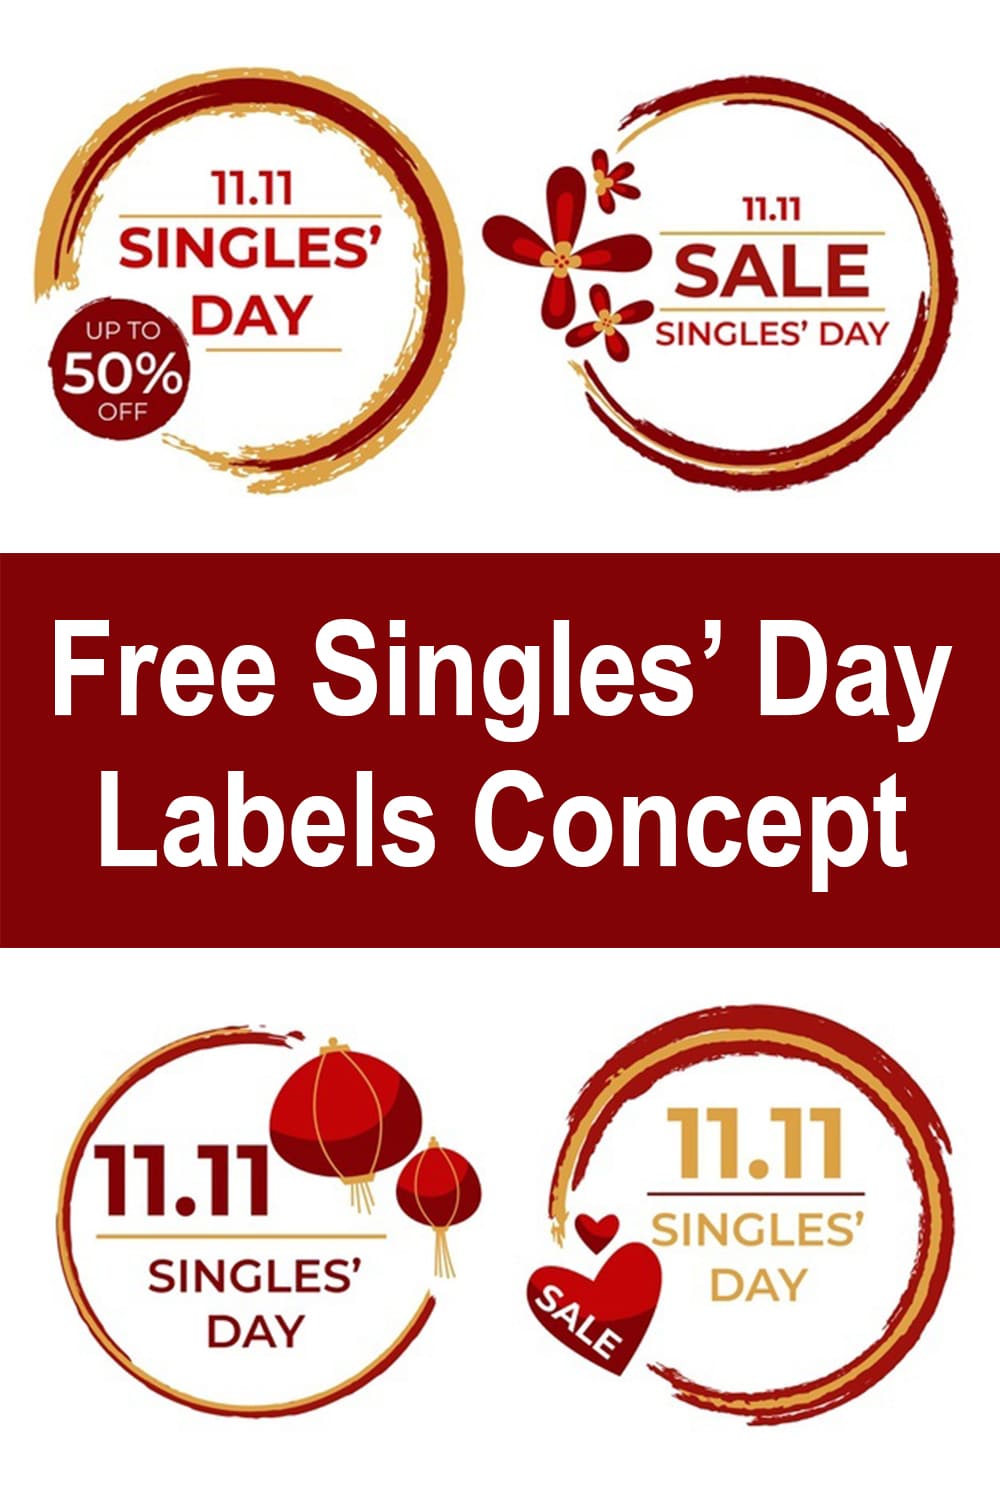 Free Singles' Day Labels Concept.